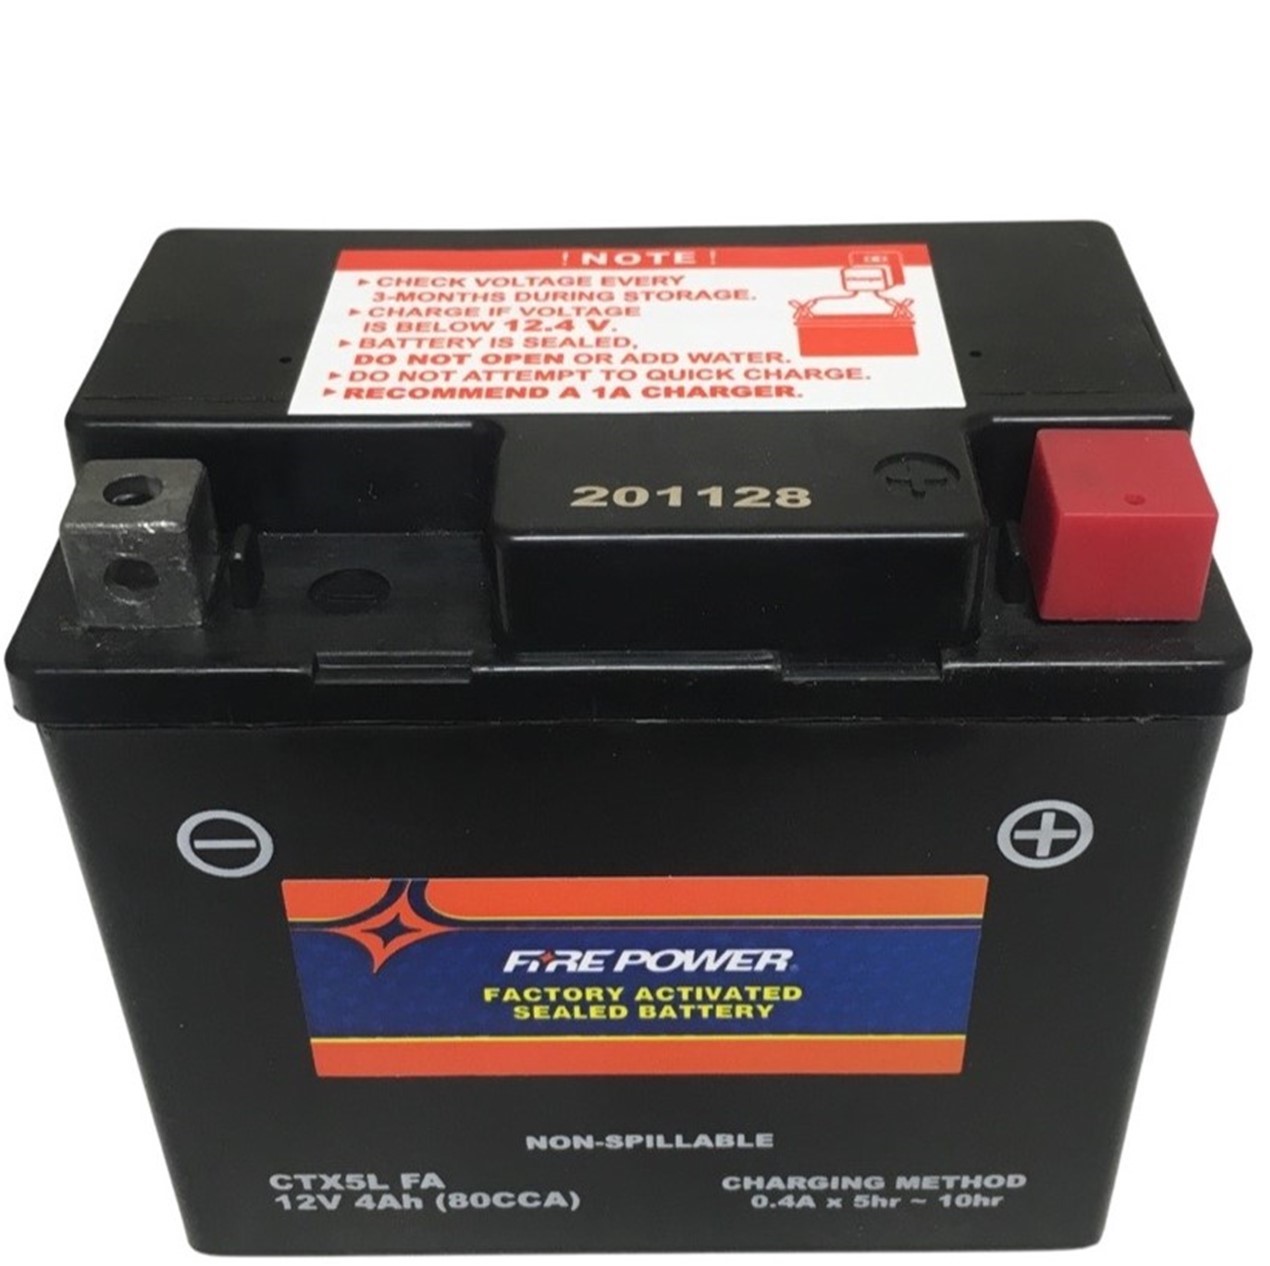 CTX5L FA Fire Power Battery Sealed Maintenance Free L=4 1/4" W=2 9/16" H=4" - Click Image to Close